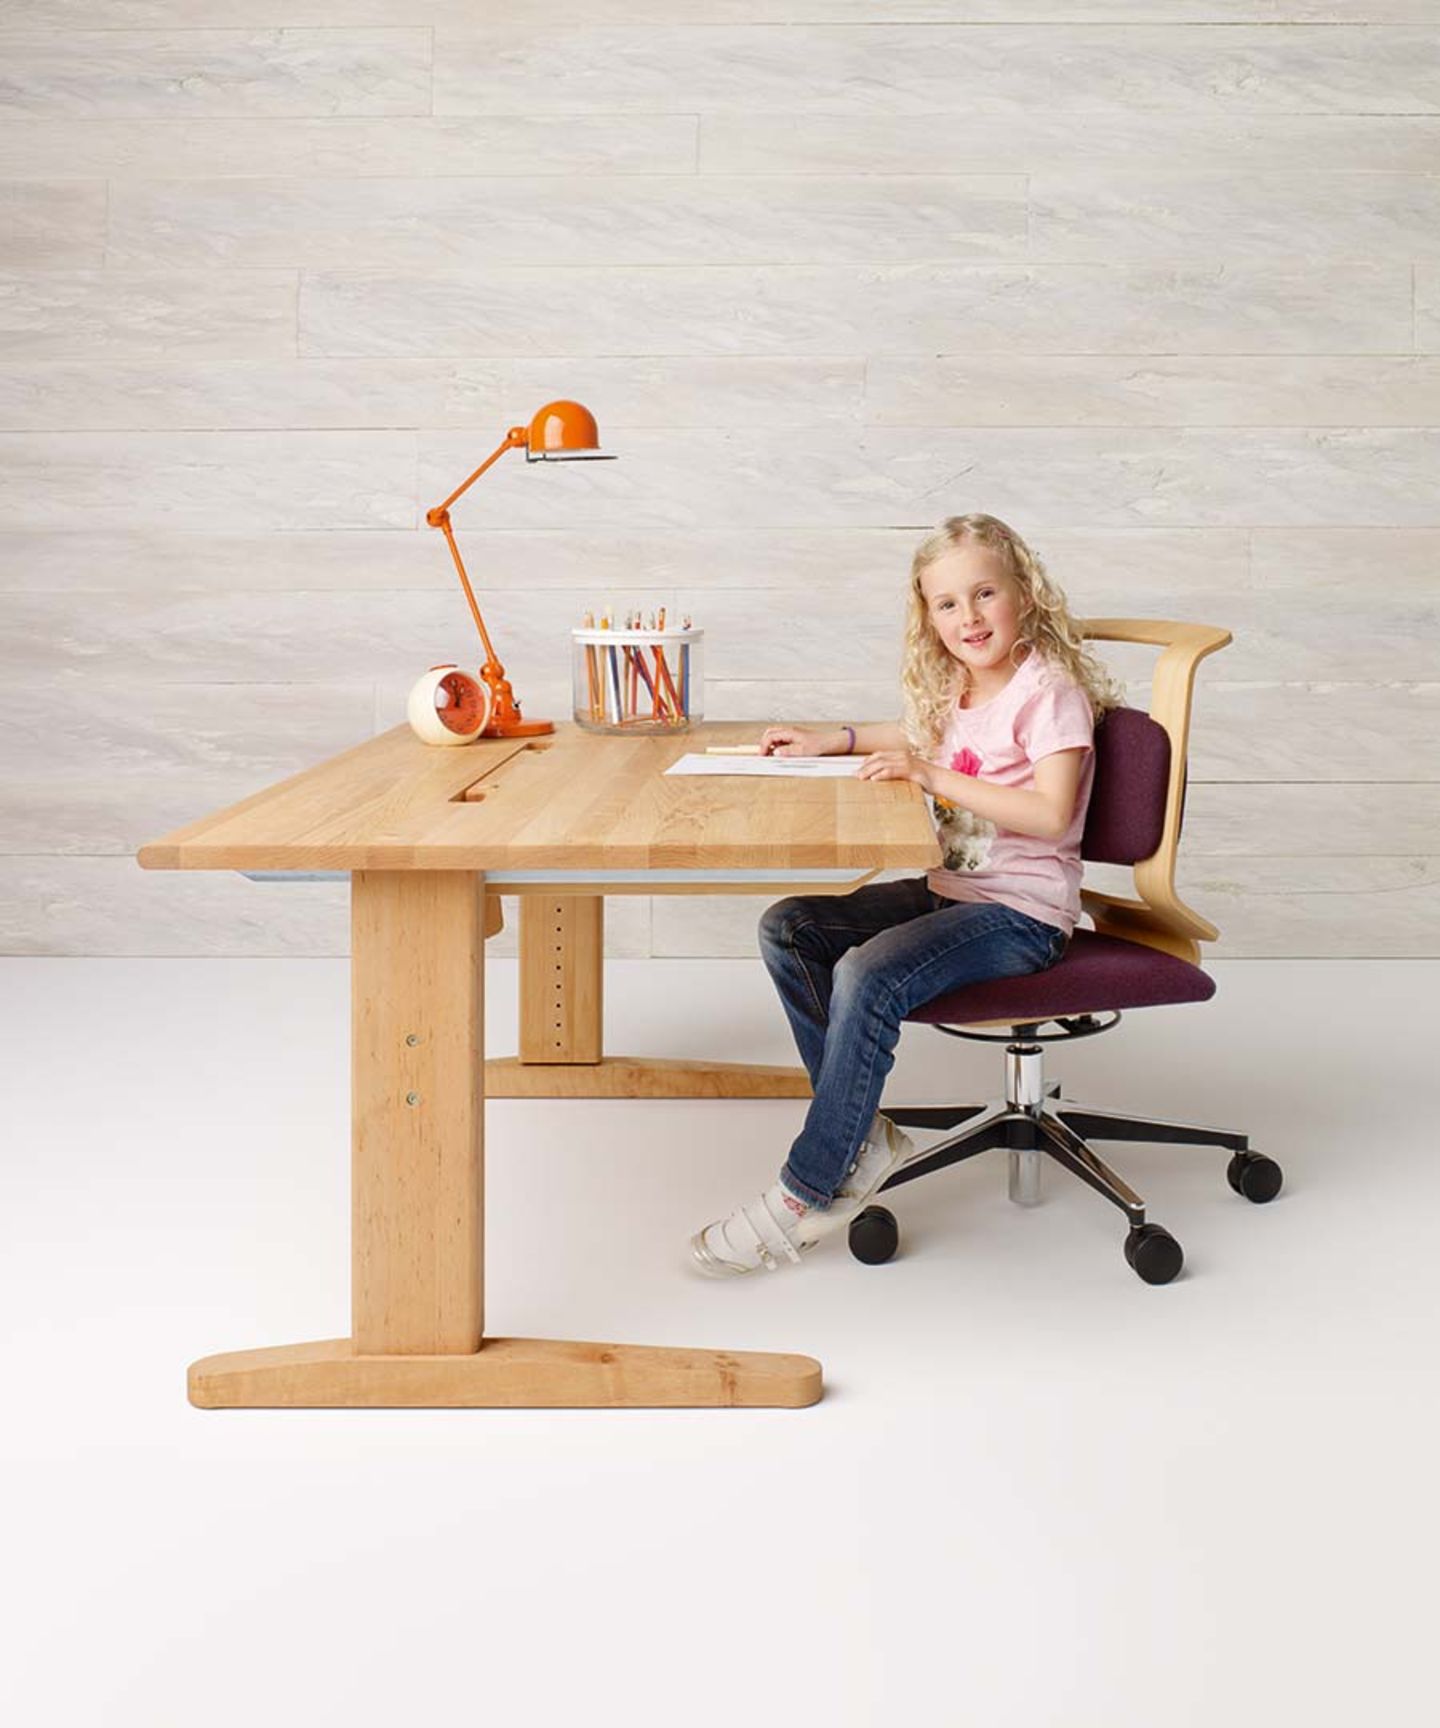 Swivel chair and desk of solid wood for kids